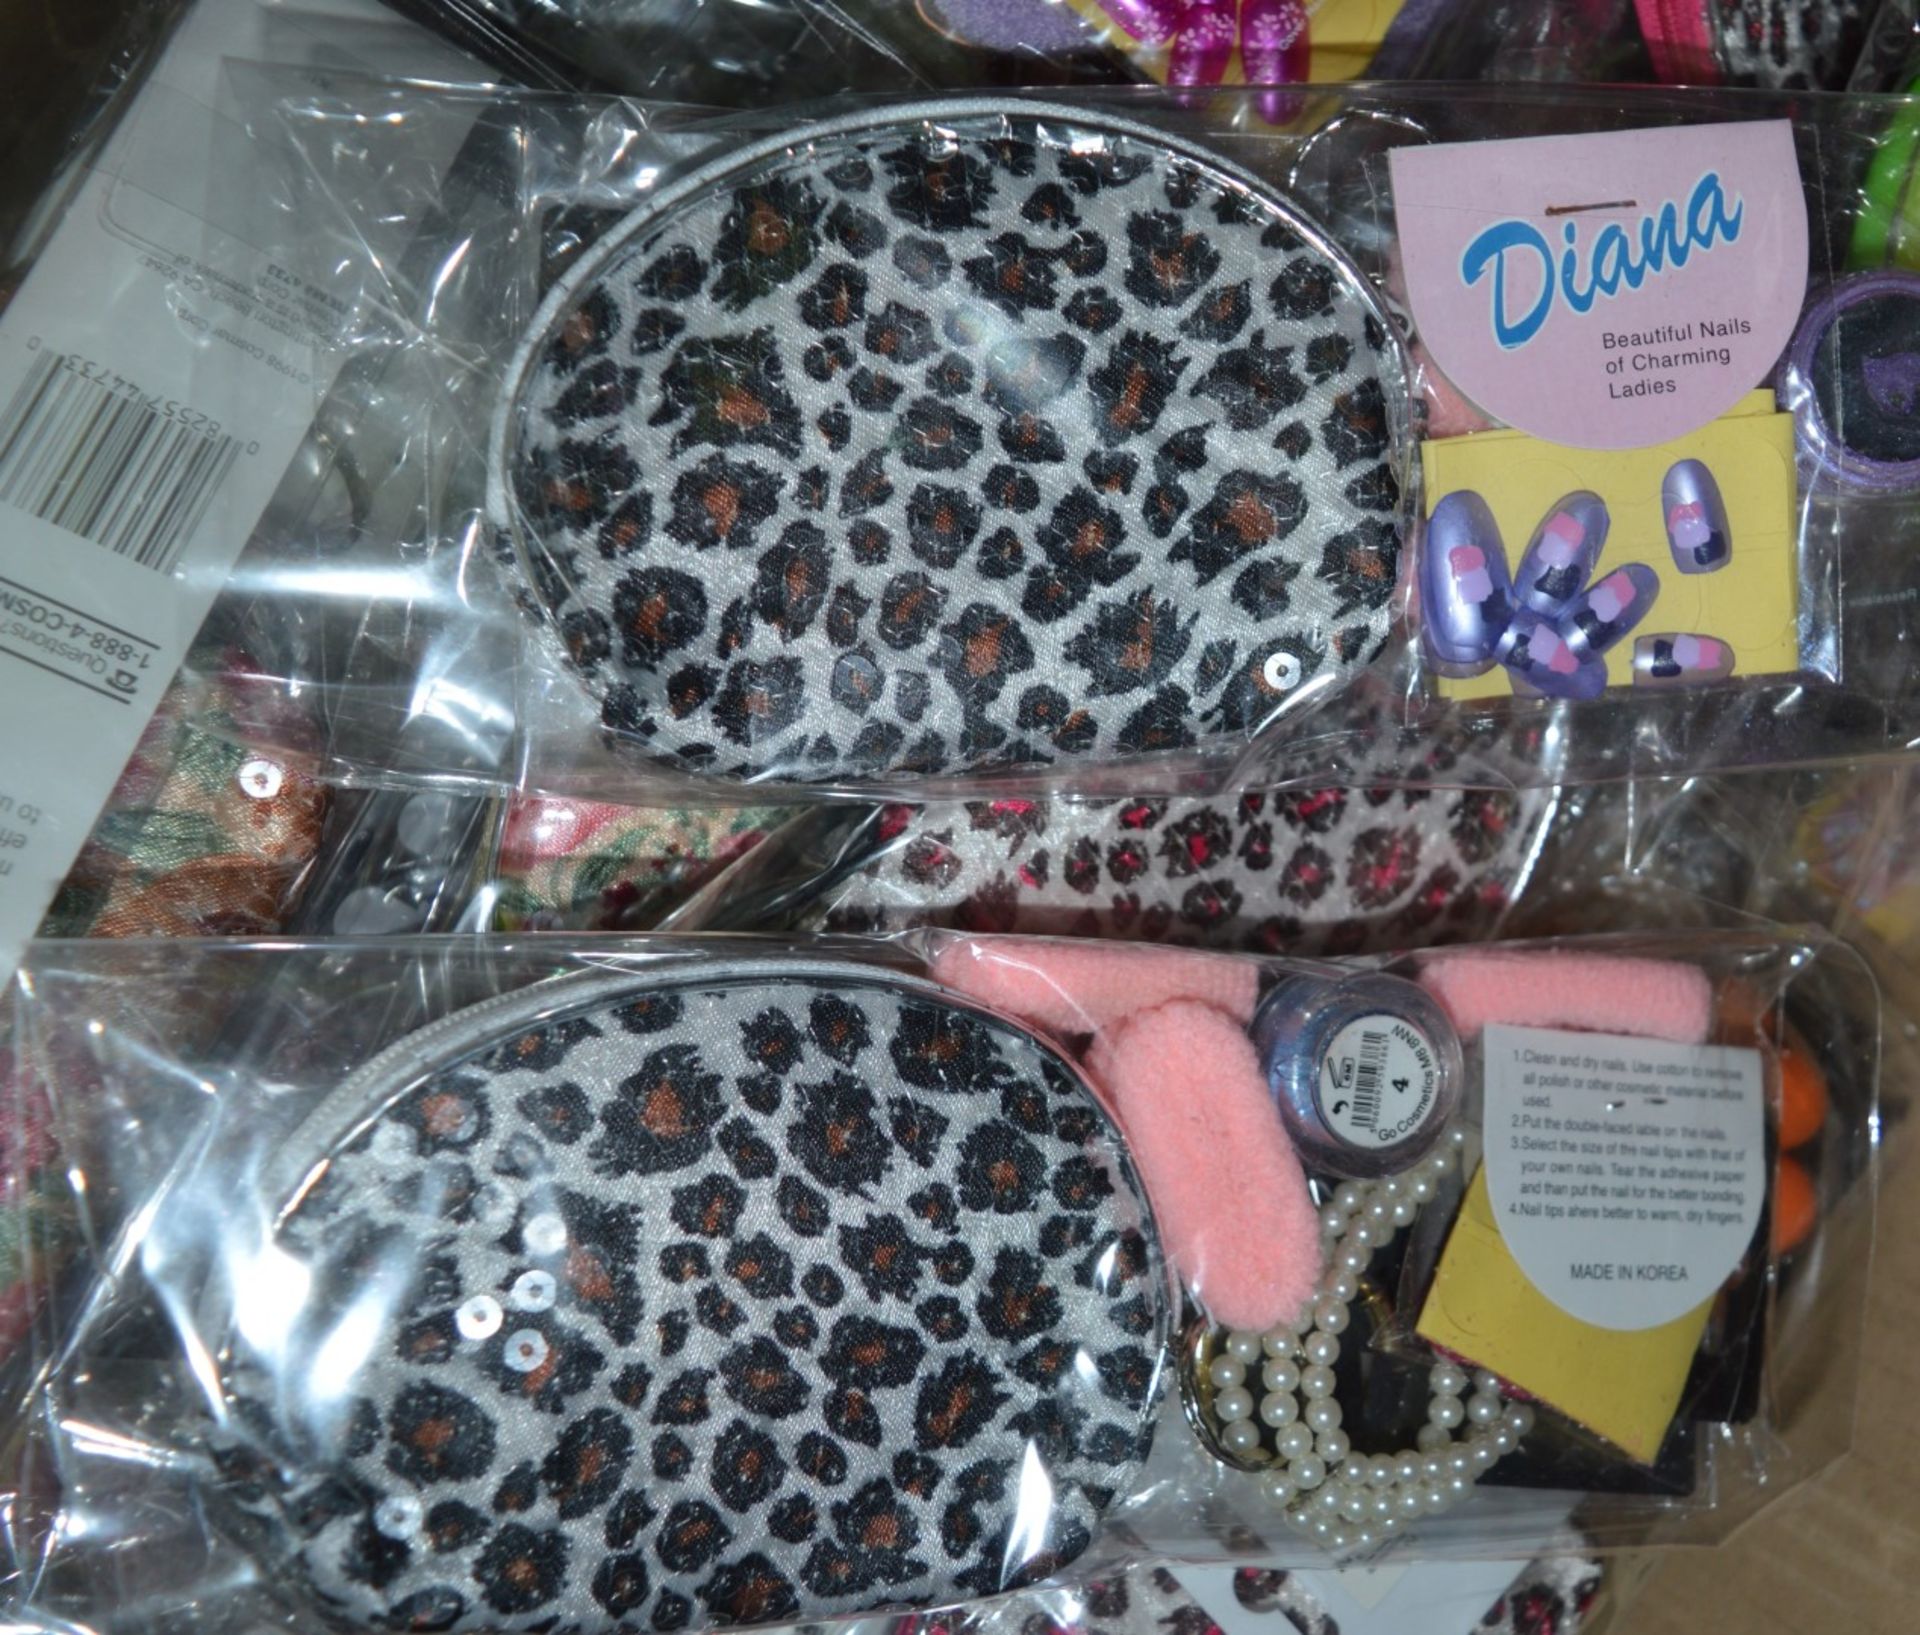 50 x Girls Beauty Gift Sets - Each Set Includes Items Such as a Stylish Purse, Ear Rings, Hair - Image 3 of 13